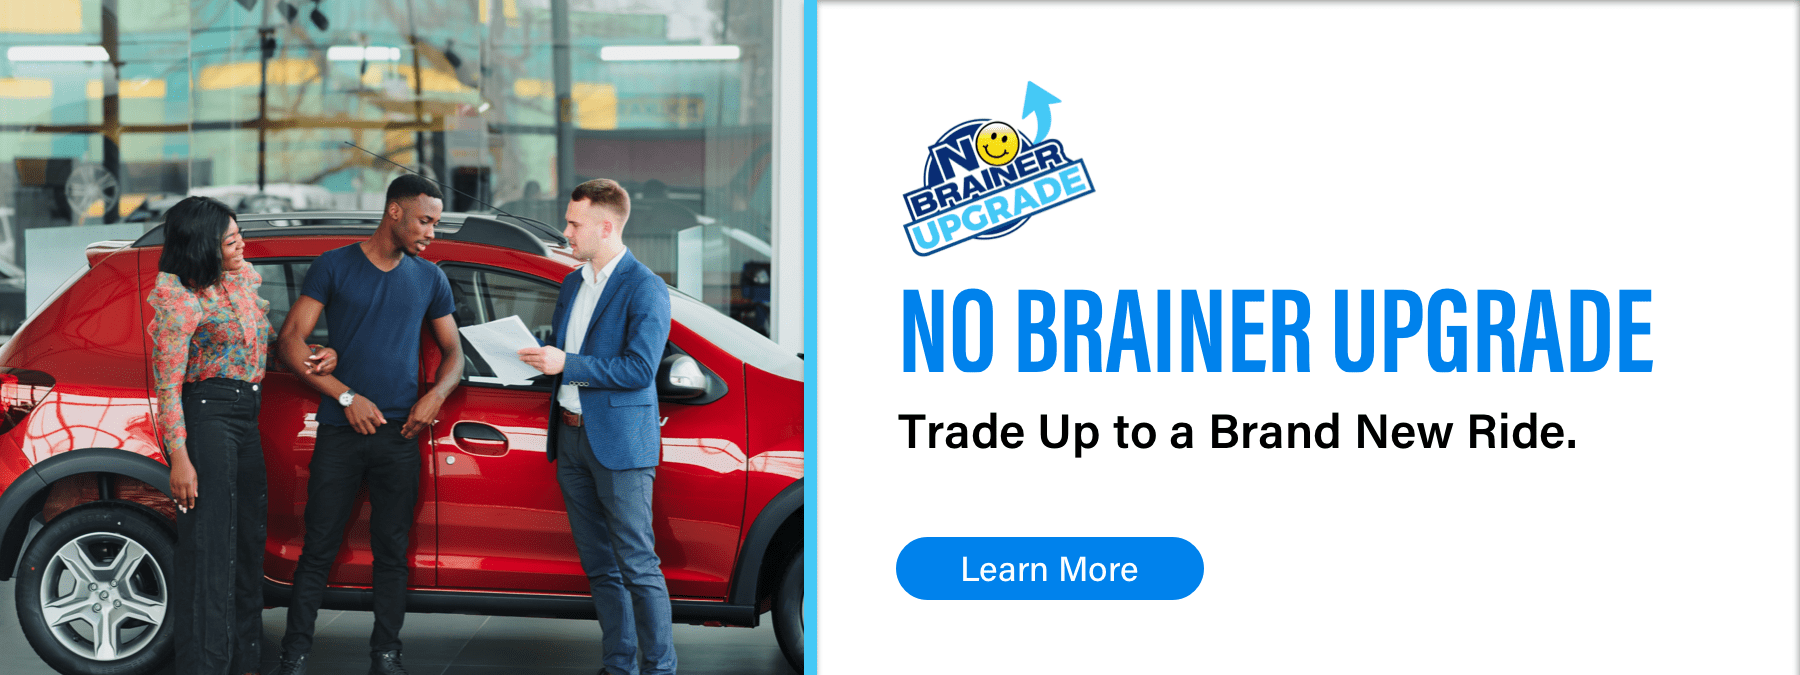 No Brainer Upgrade, Trade Up to a Brand New Ride., Learn More